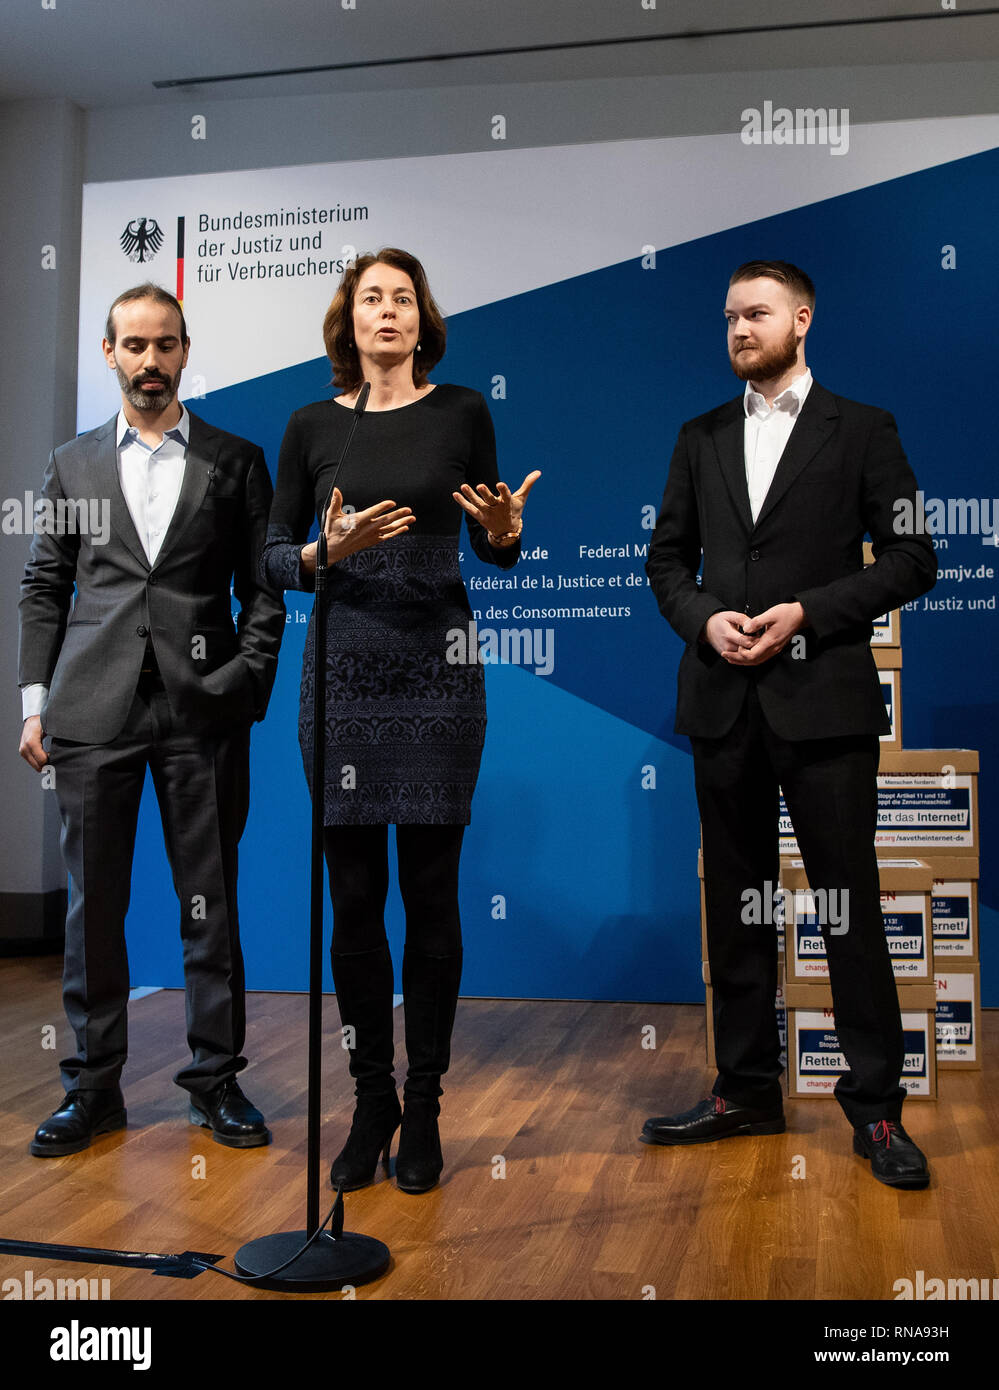 Berlin, Germany. 18th Feb, 2019. Katarina Barley (M, SPD), Federal Minister  of Justice, is joined by activists Pascal Fouquet (l) and Dominic Kis on  the occasion of the handover of around 4.7